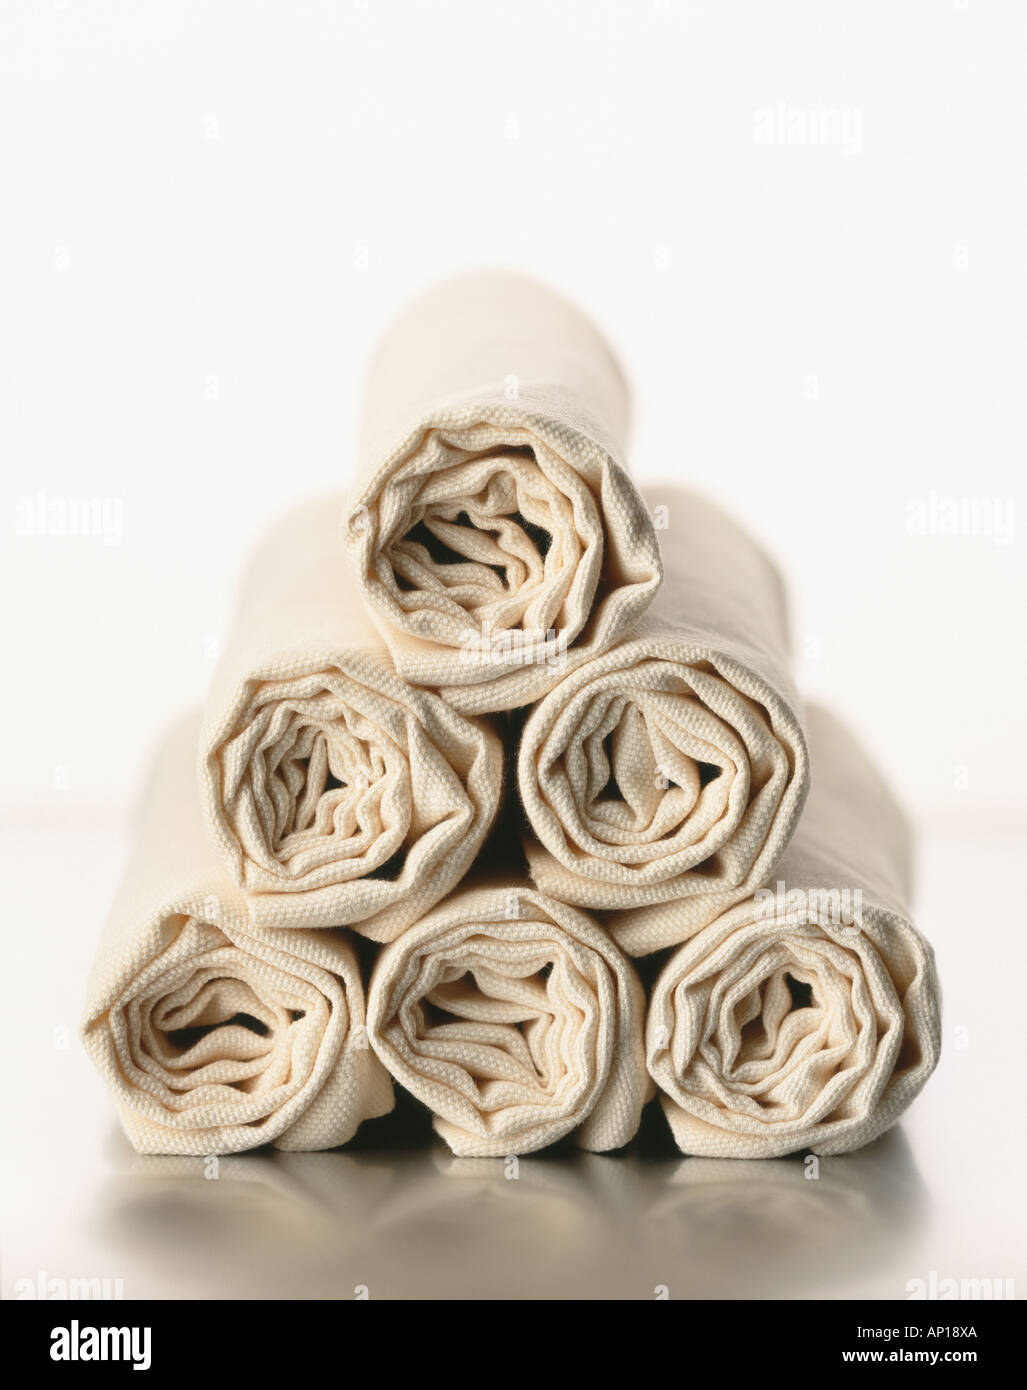 Six Cotton Napkins Cream Colour Rolled up on Top of Each Other Stock Photo